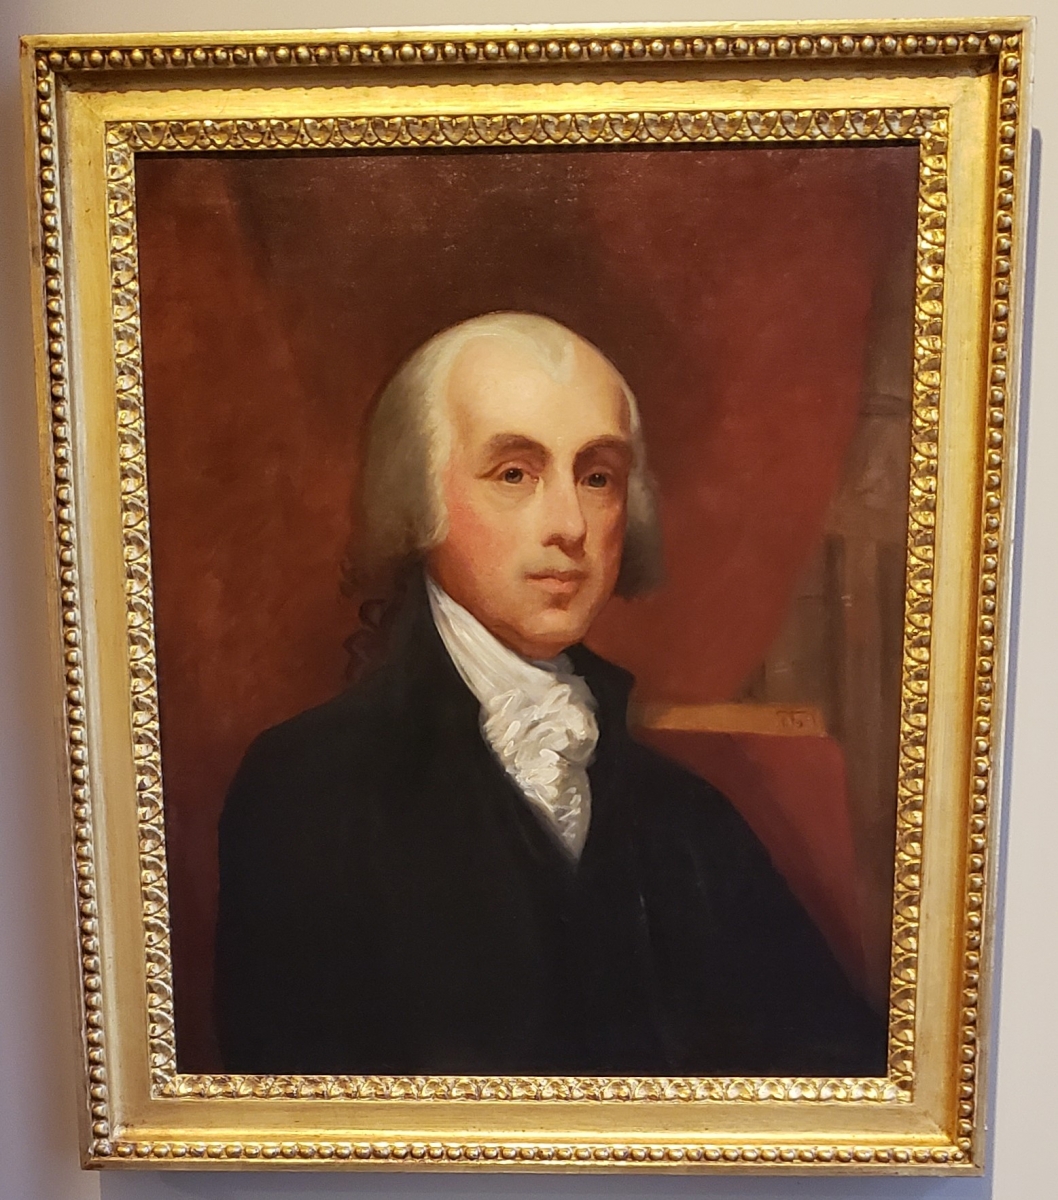 Portrait of James Madison hanging in the Second Bank of the United States Portrait Gallery